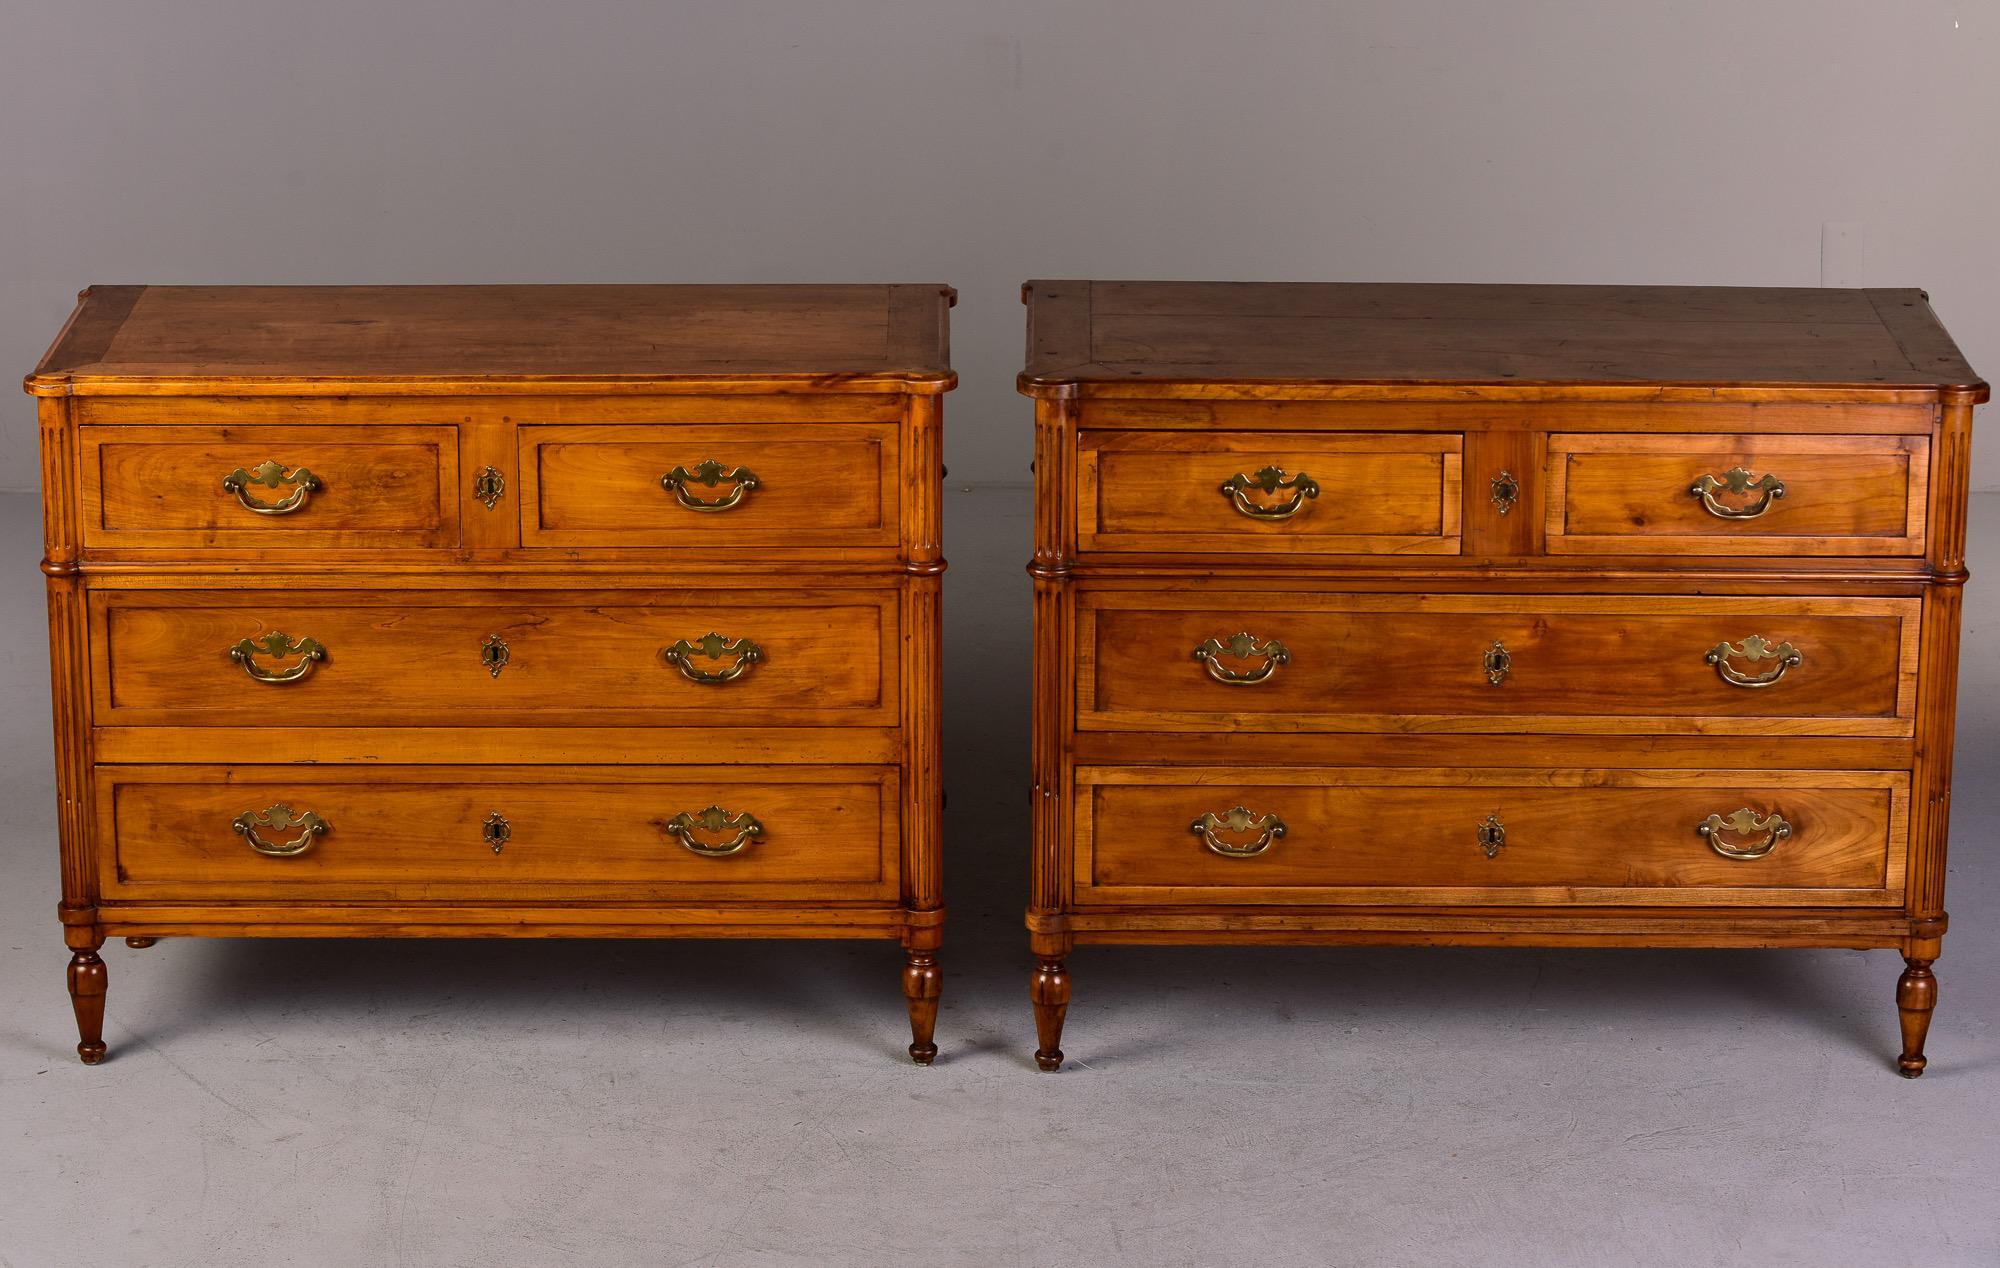 English Late 19th C Near Pair of Cherry Chests of Drawers